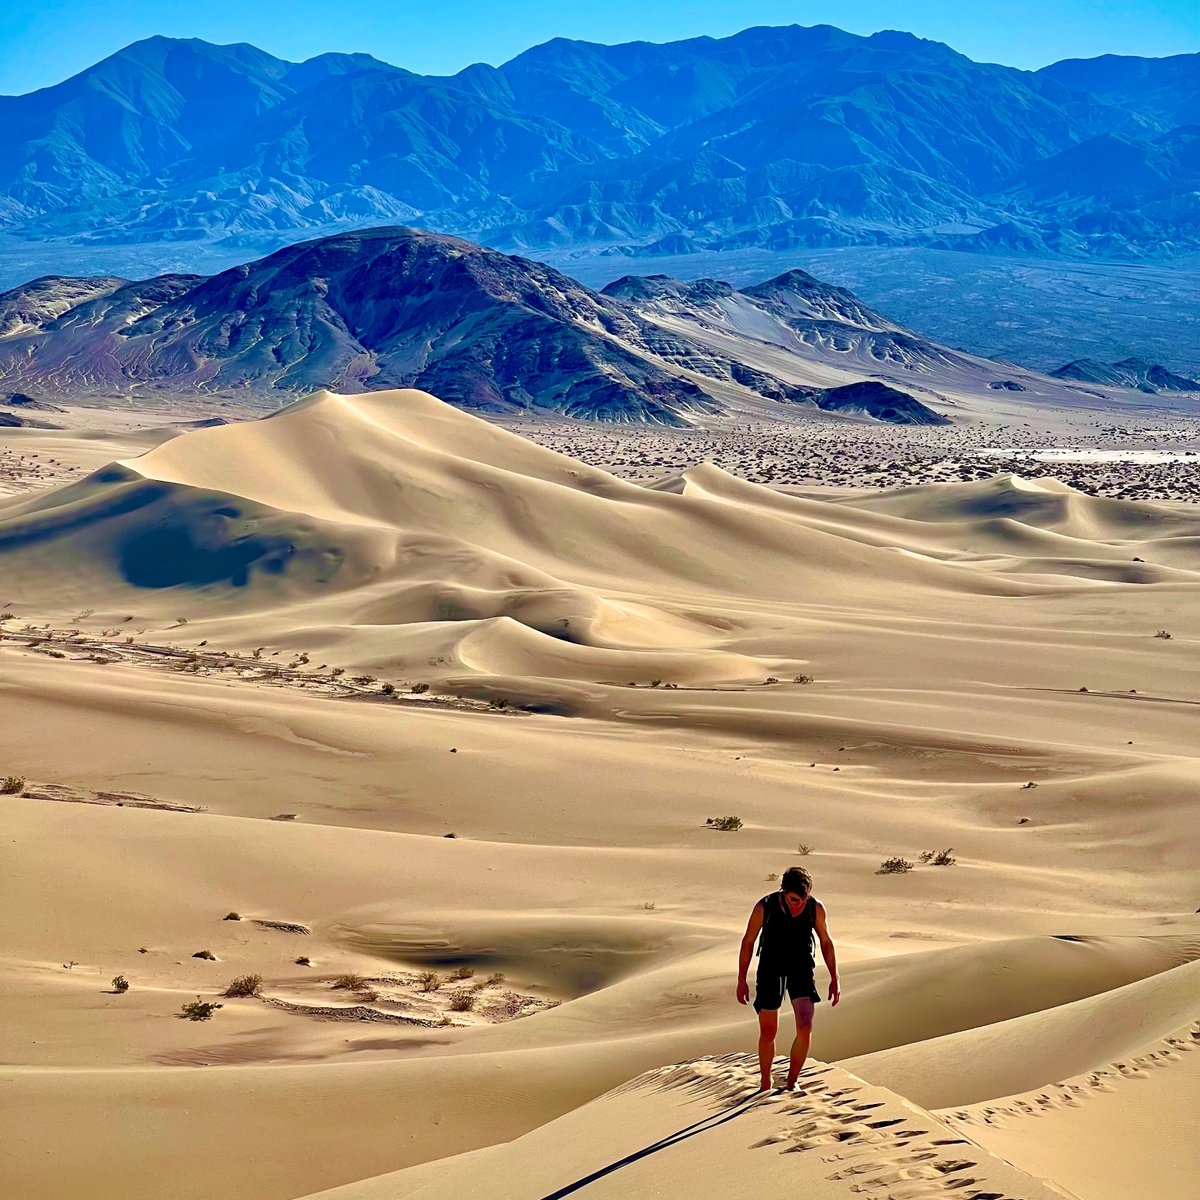 'How you dune?' 😏 Located in the southern portion of Death Valley NP, Ibex Dunes stand tall, overlooking the big bend in the Amargosa as it makes its way toward Saratoga Springs and its final destination at Badwater Basin. A great off-the-beaten-path adventure spot!